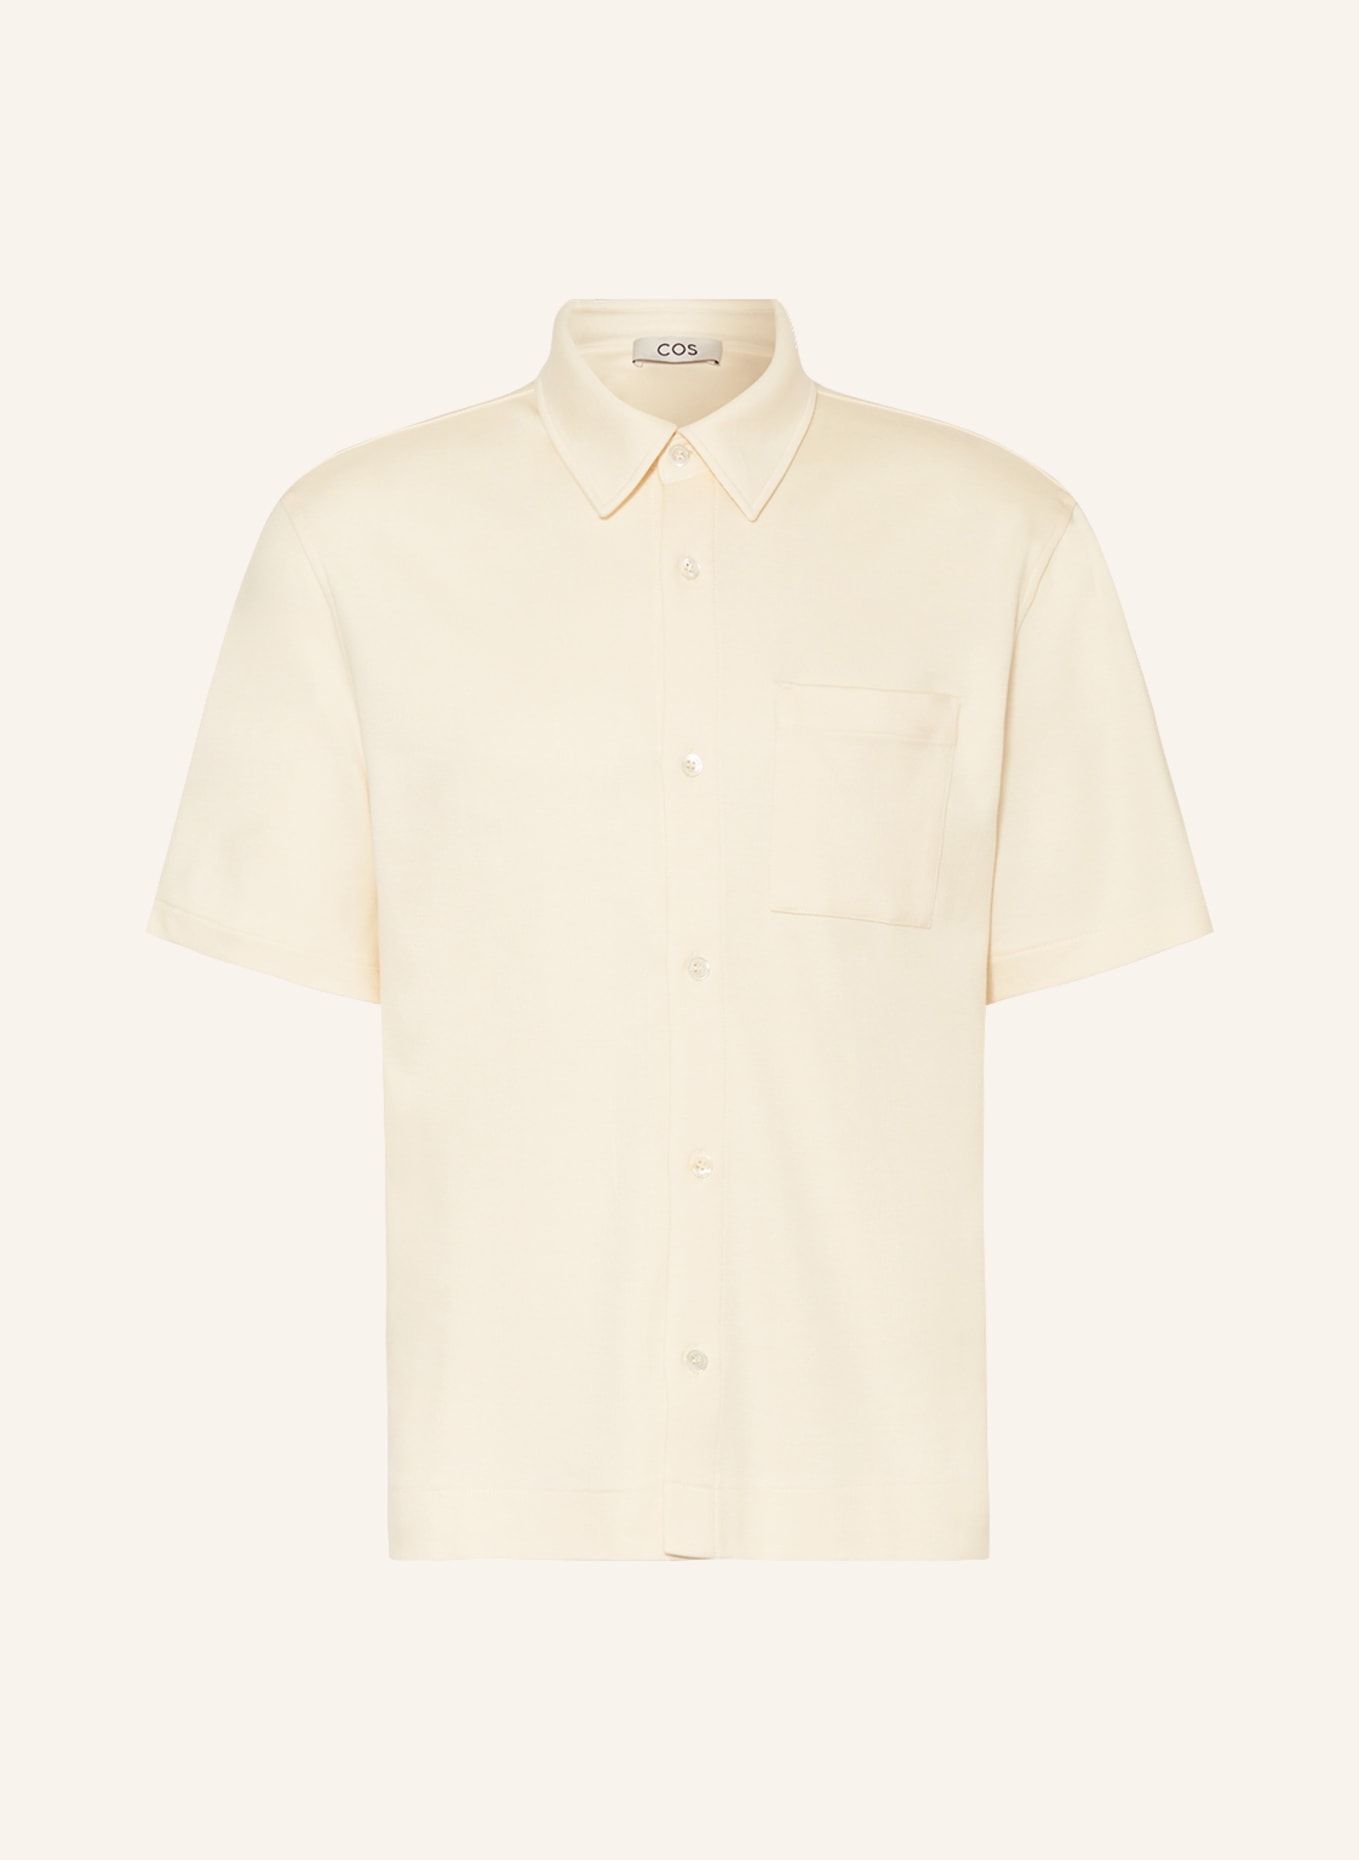 COS Short sleeve shirt relaxed fit, Color: CREAM (Image 1)